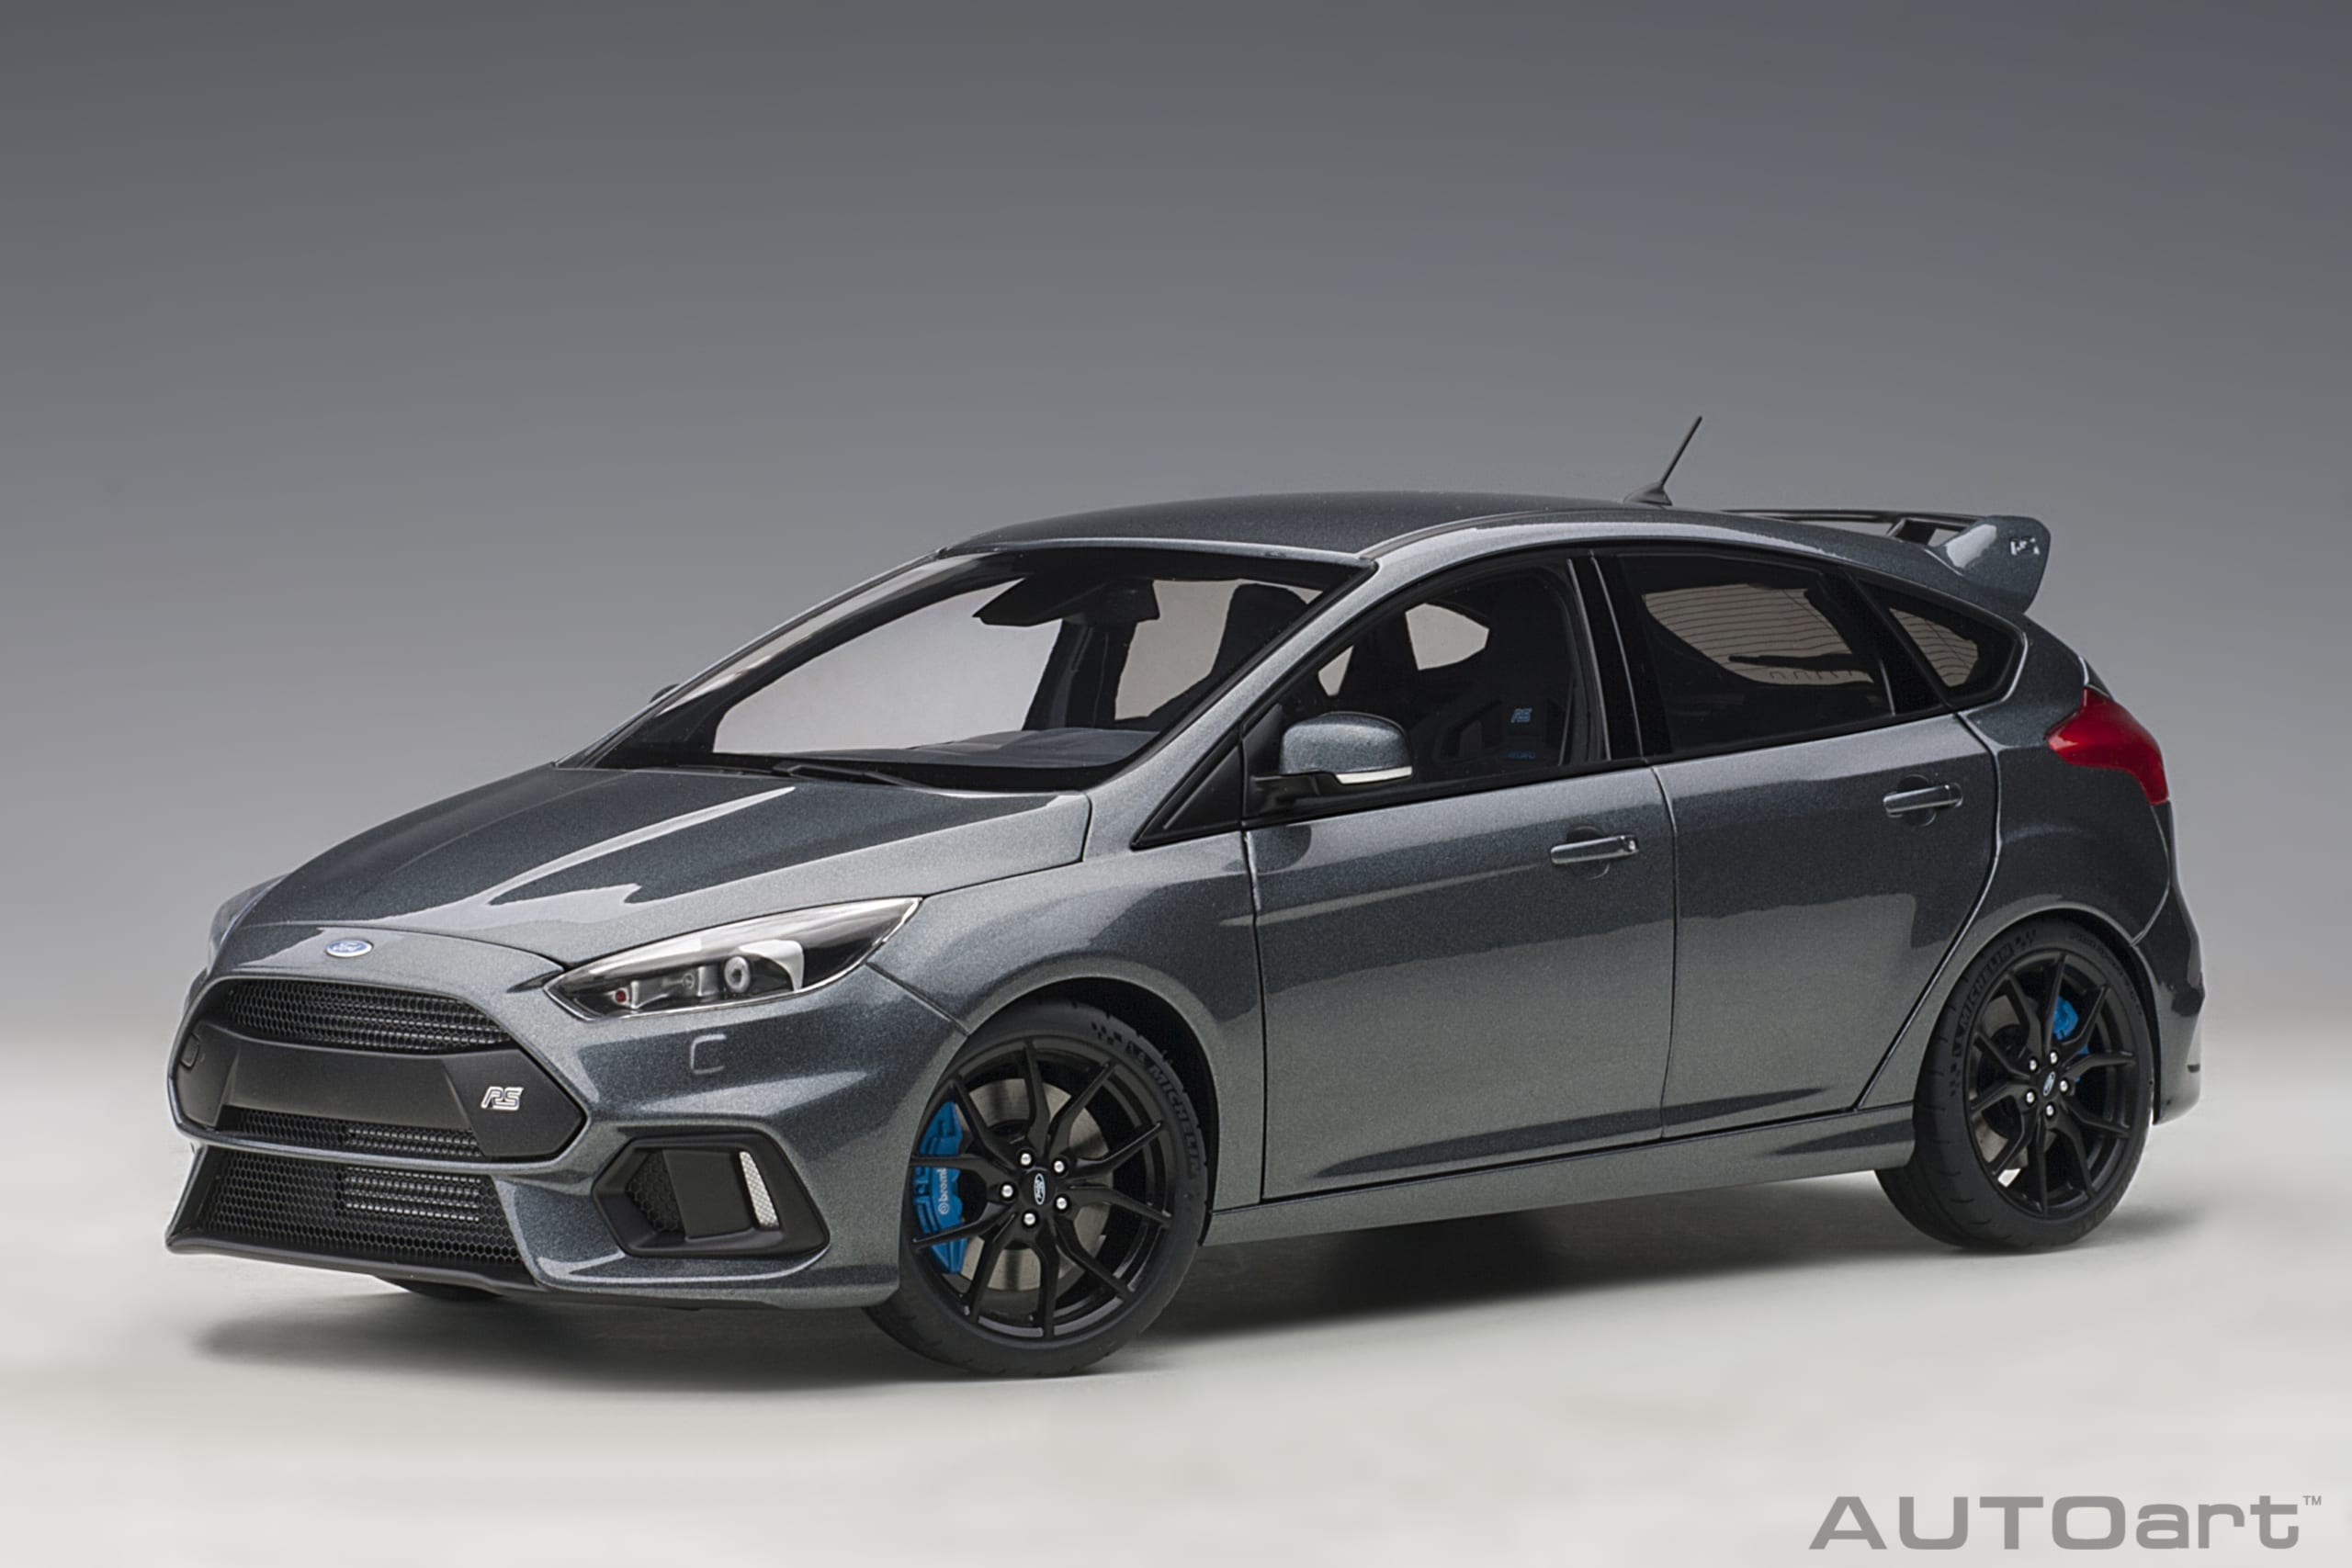 Now stock, parts for 72954 Ford Focus RS Grey - AUTOart Spares